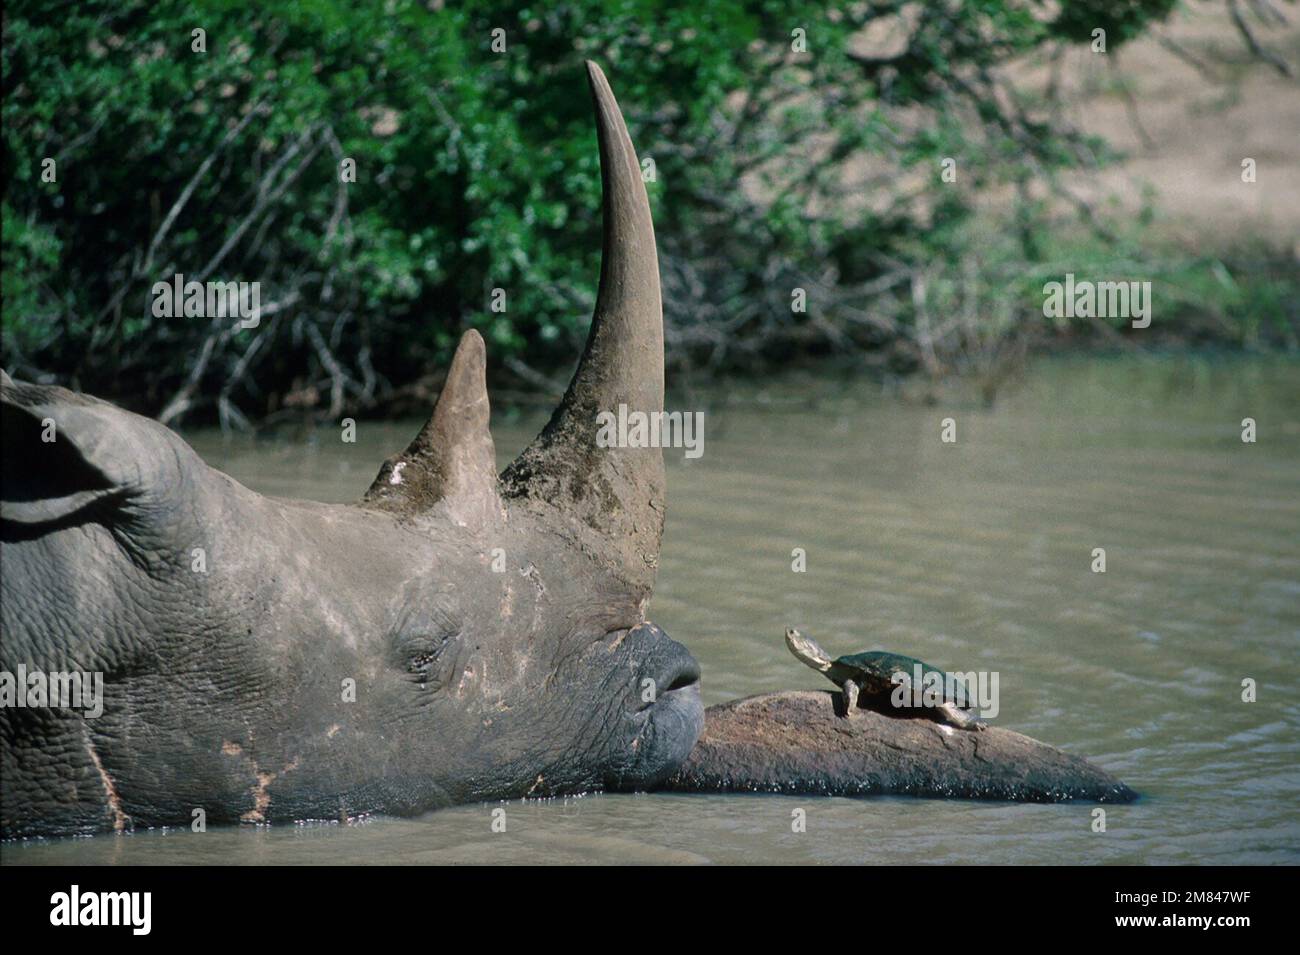 White Rhinoceros (Ceratotherium simum), classified as Near Threatened, with African Helmeted Turtle (Pelomedusa subrufa) on rock in waterhole Stock Photo